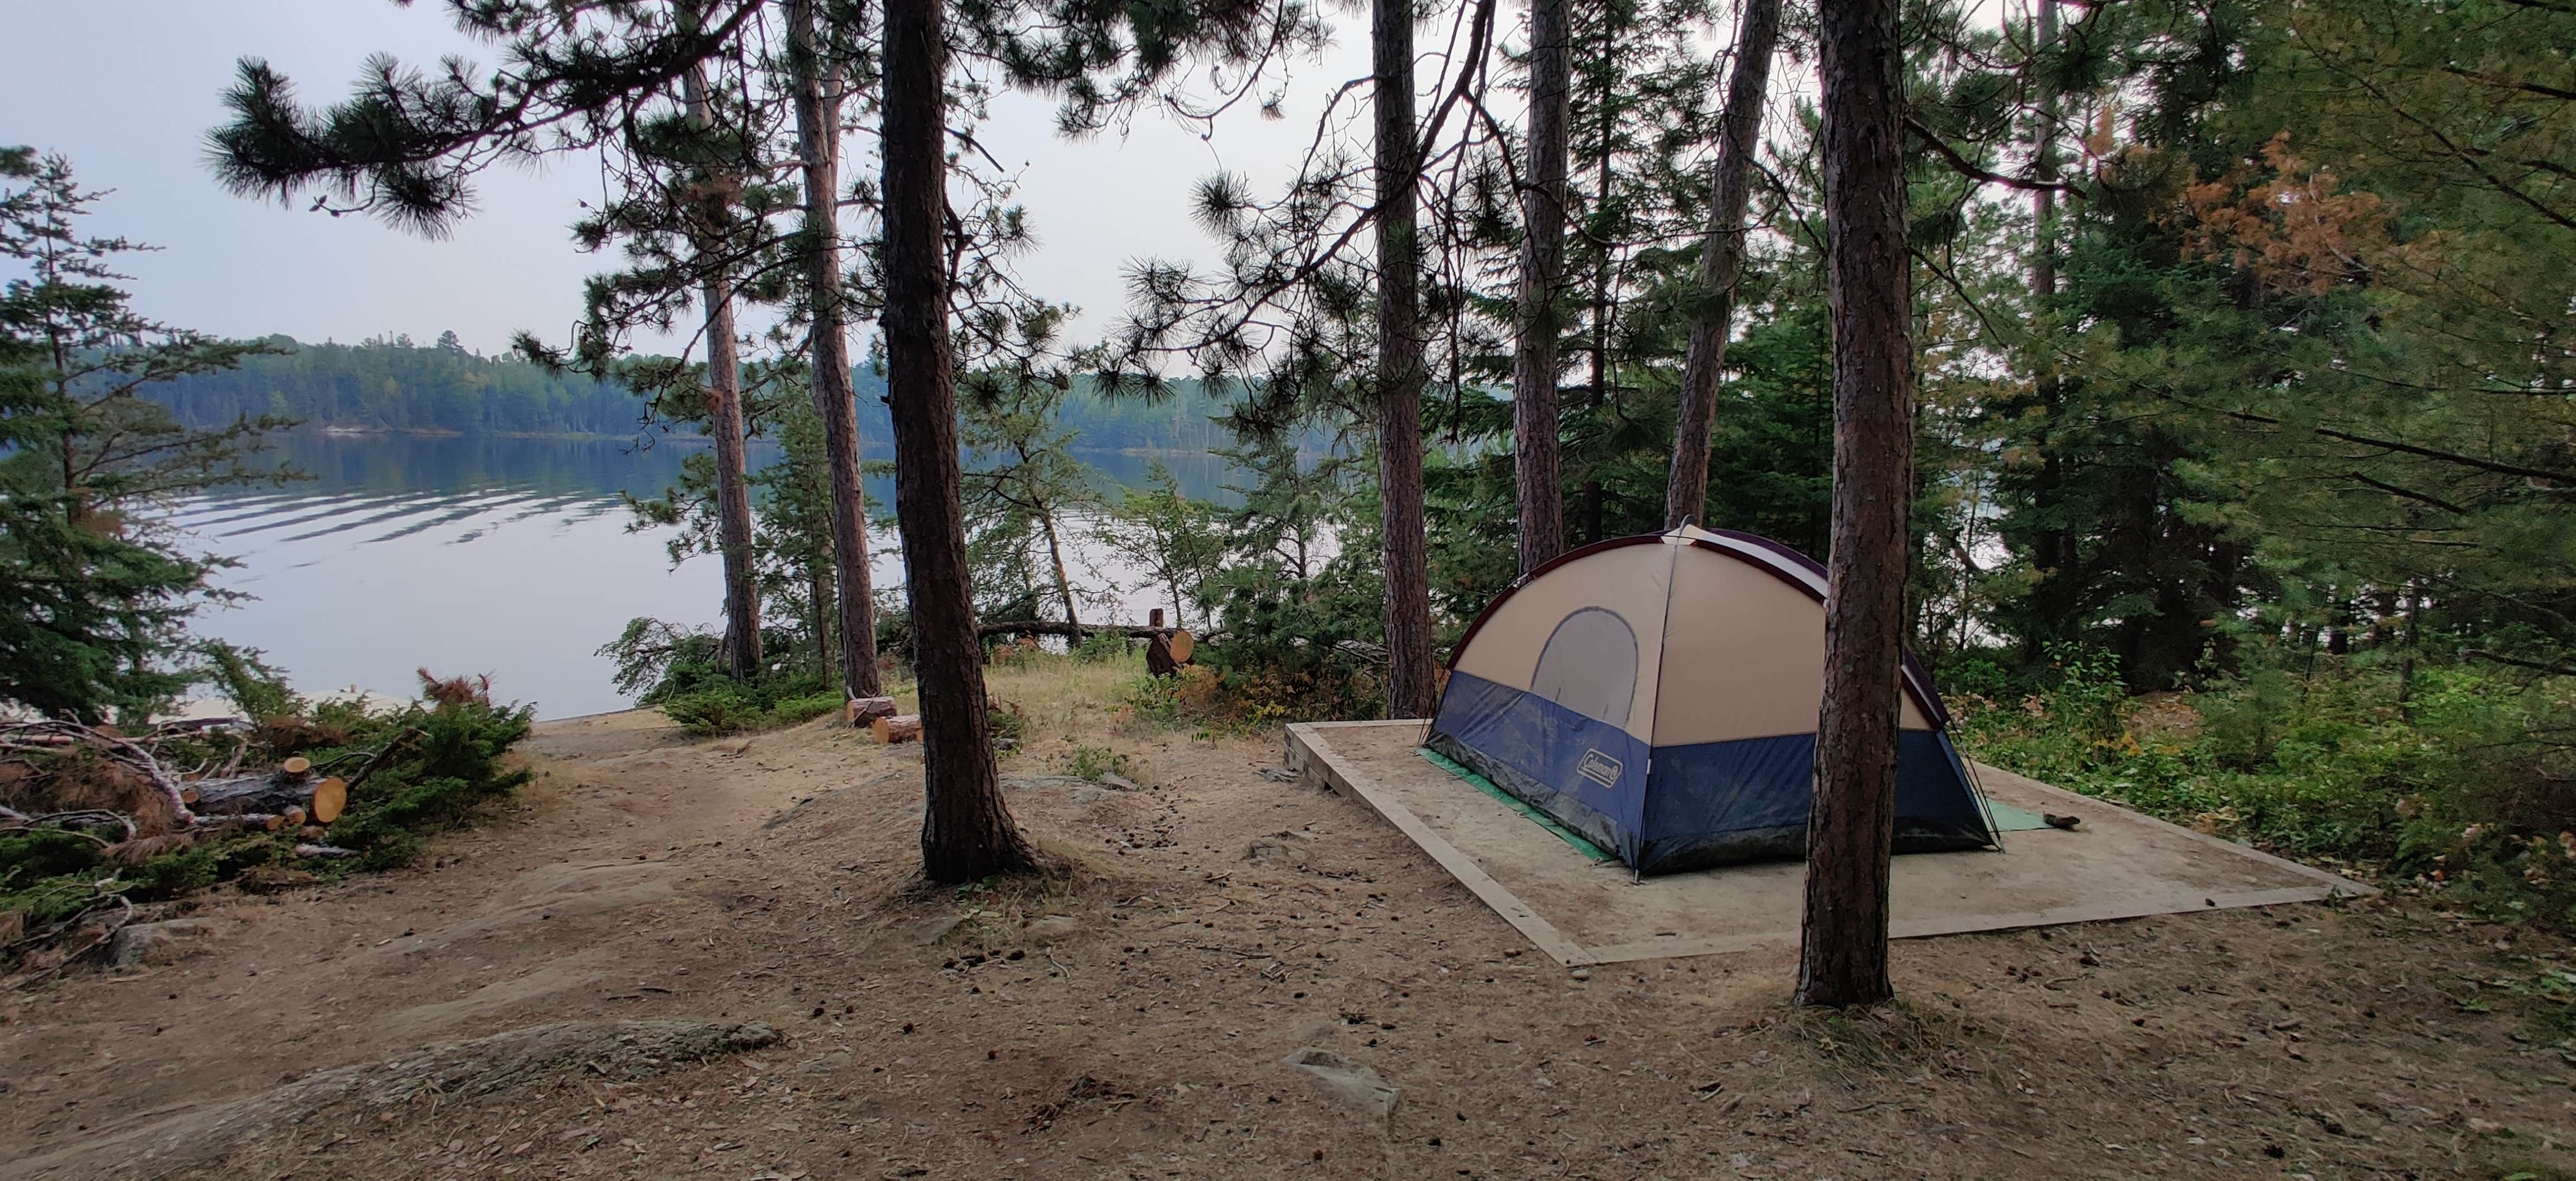 Camper submitted image from Voyageurs National Park Backcountry Camping — Voyageurs National Park - 1